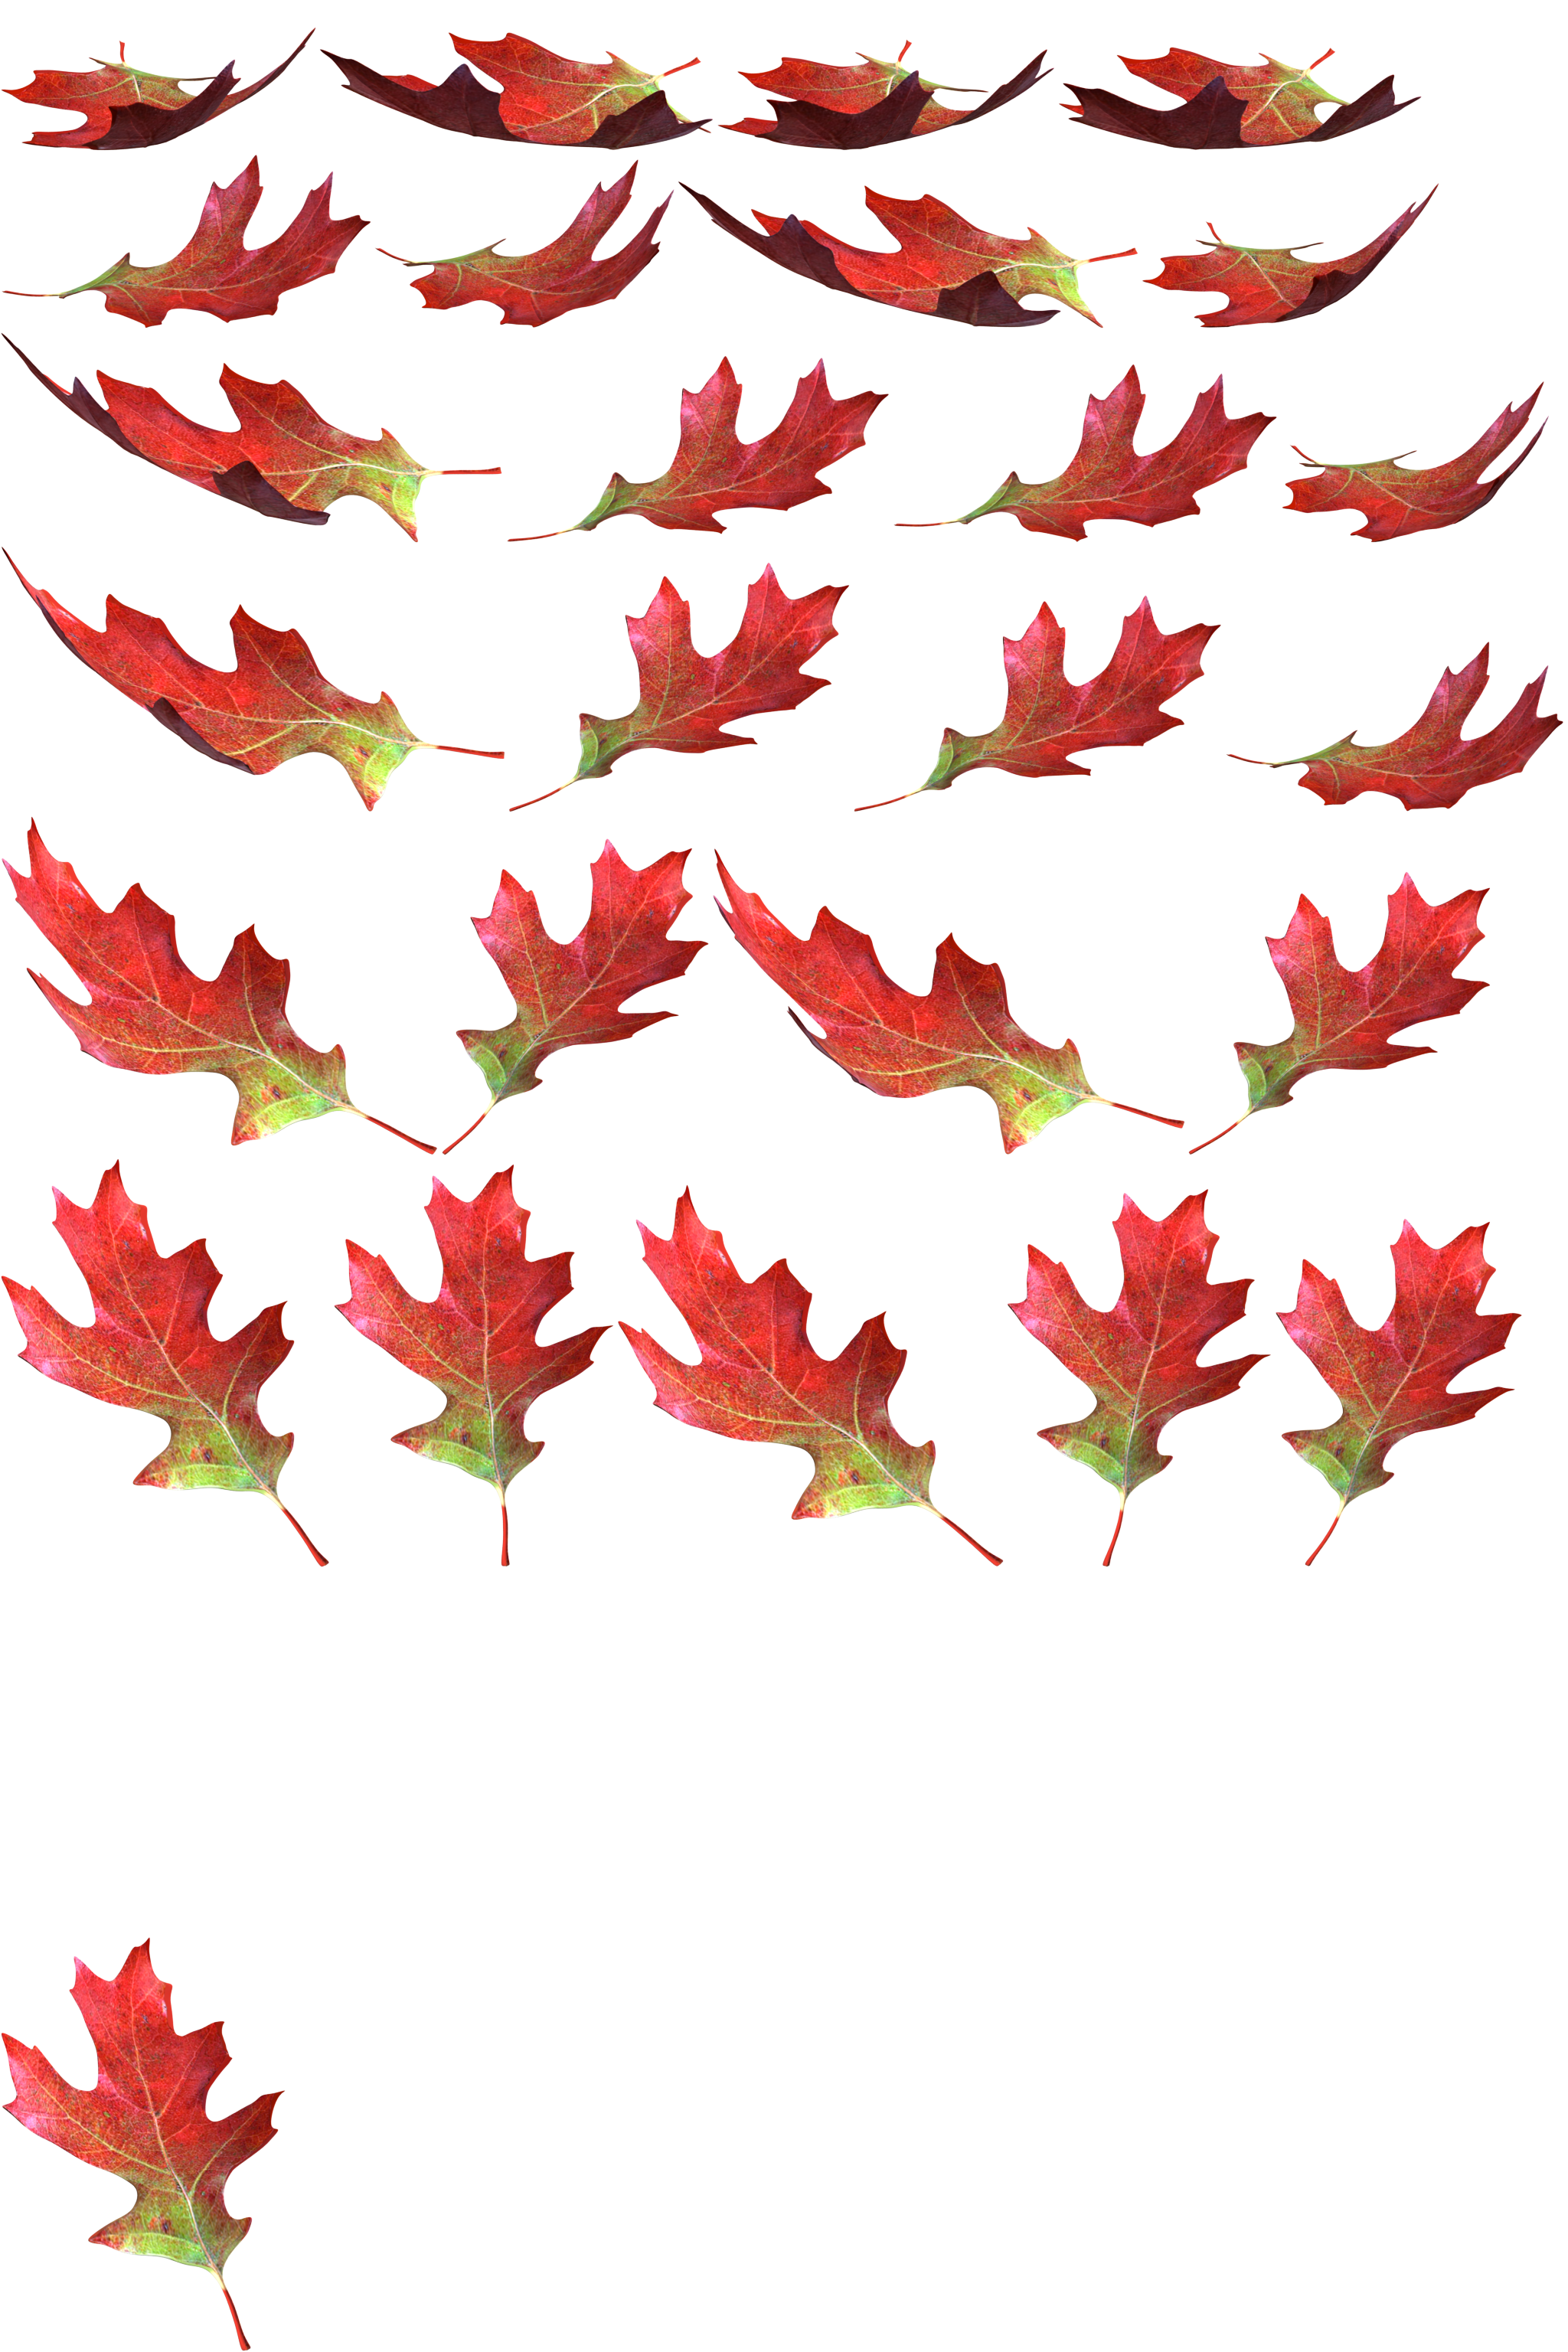 KID PIX 5: The STEAM Edition - Leaf Red